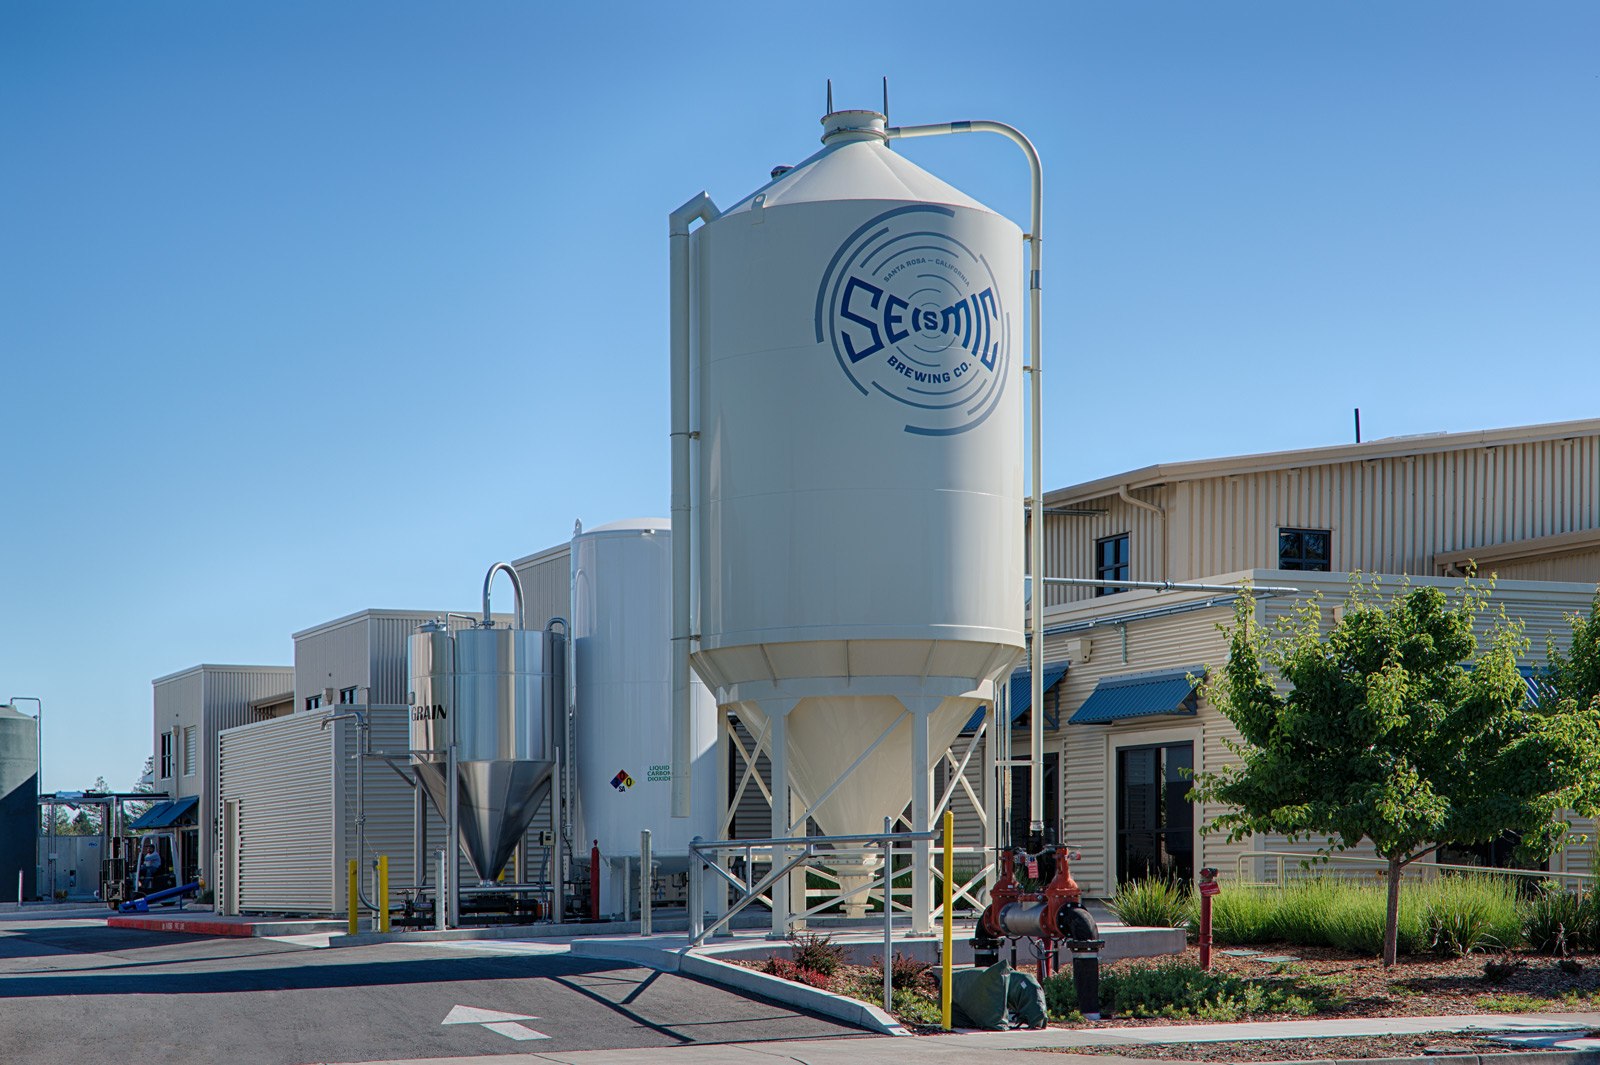 Seismic Brewing Co. brewery